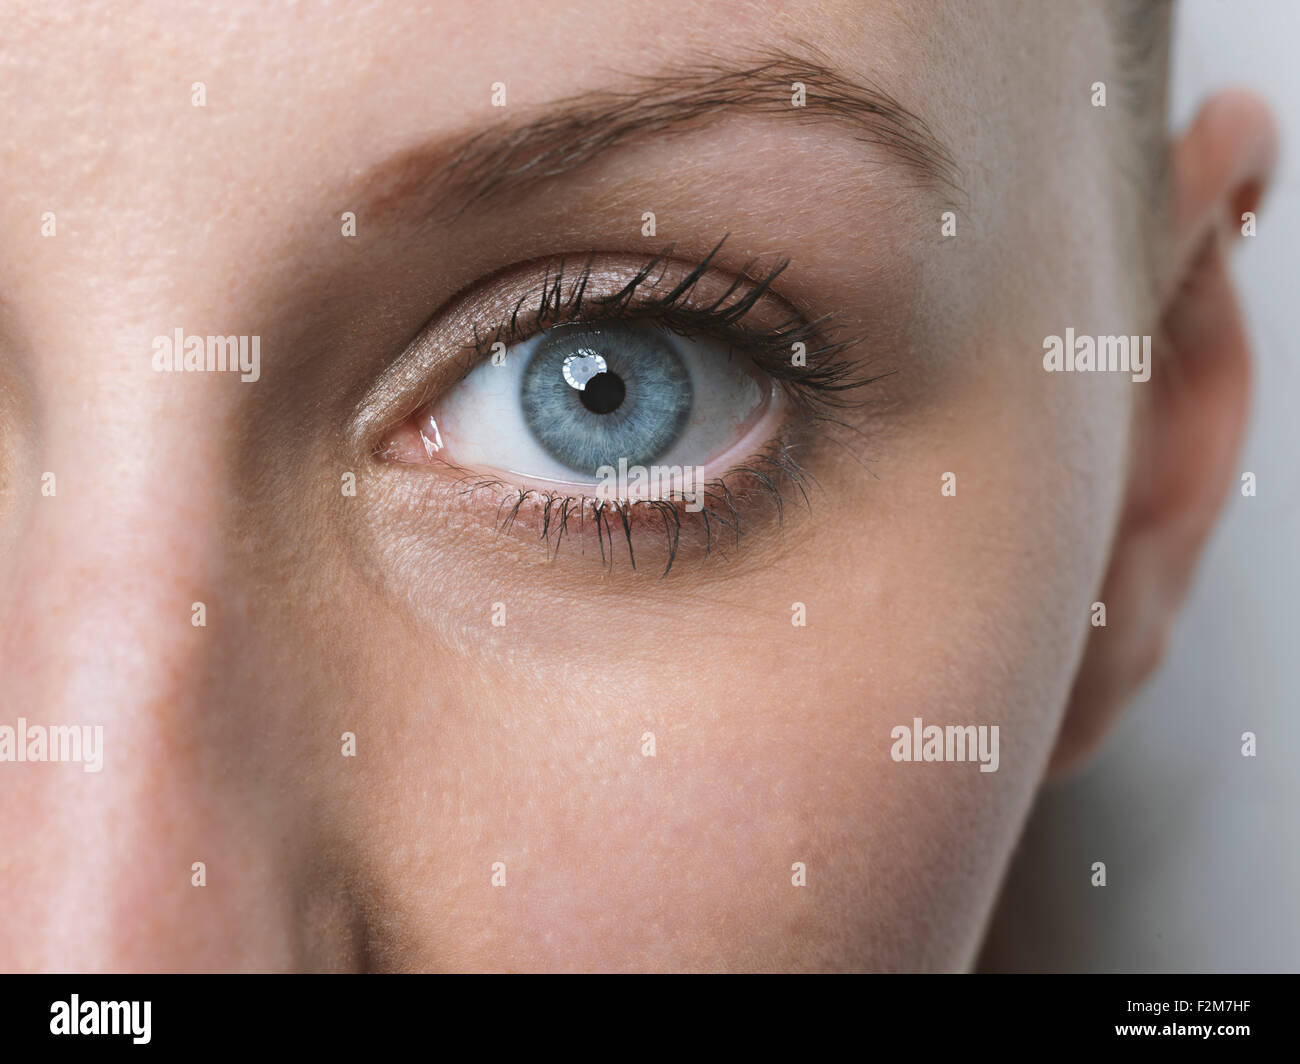 Close-up of blue eye of a  young woman Stock Photo